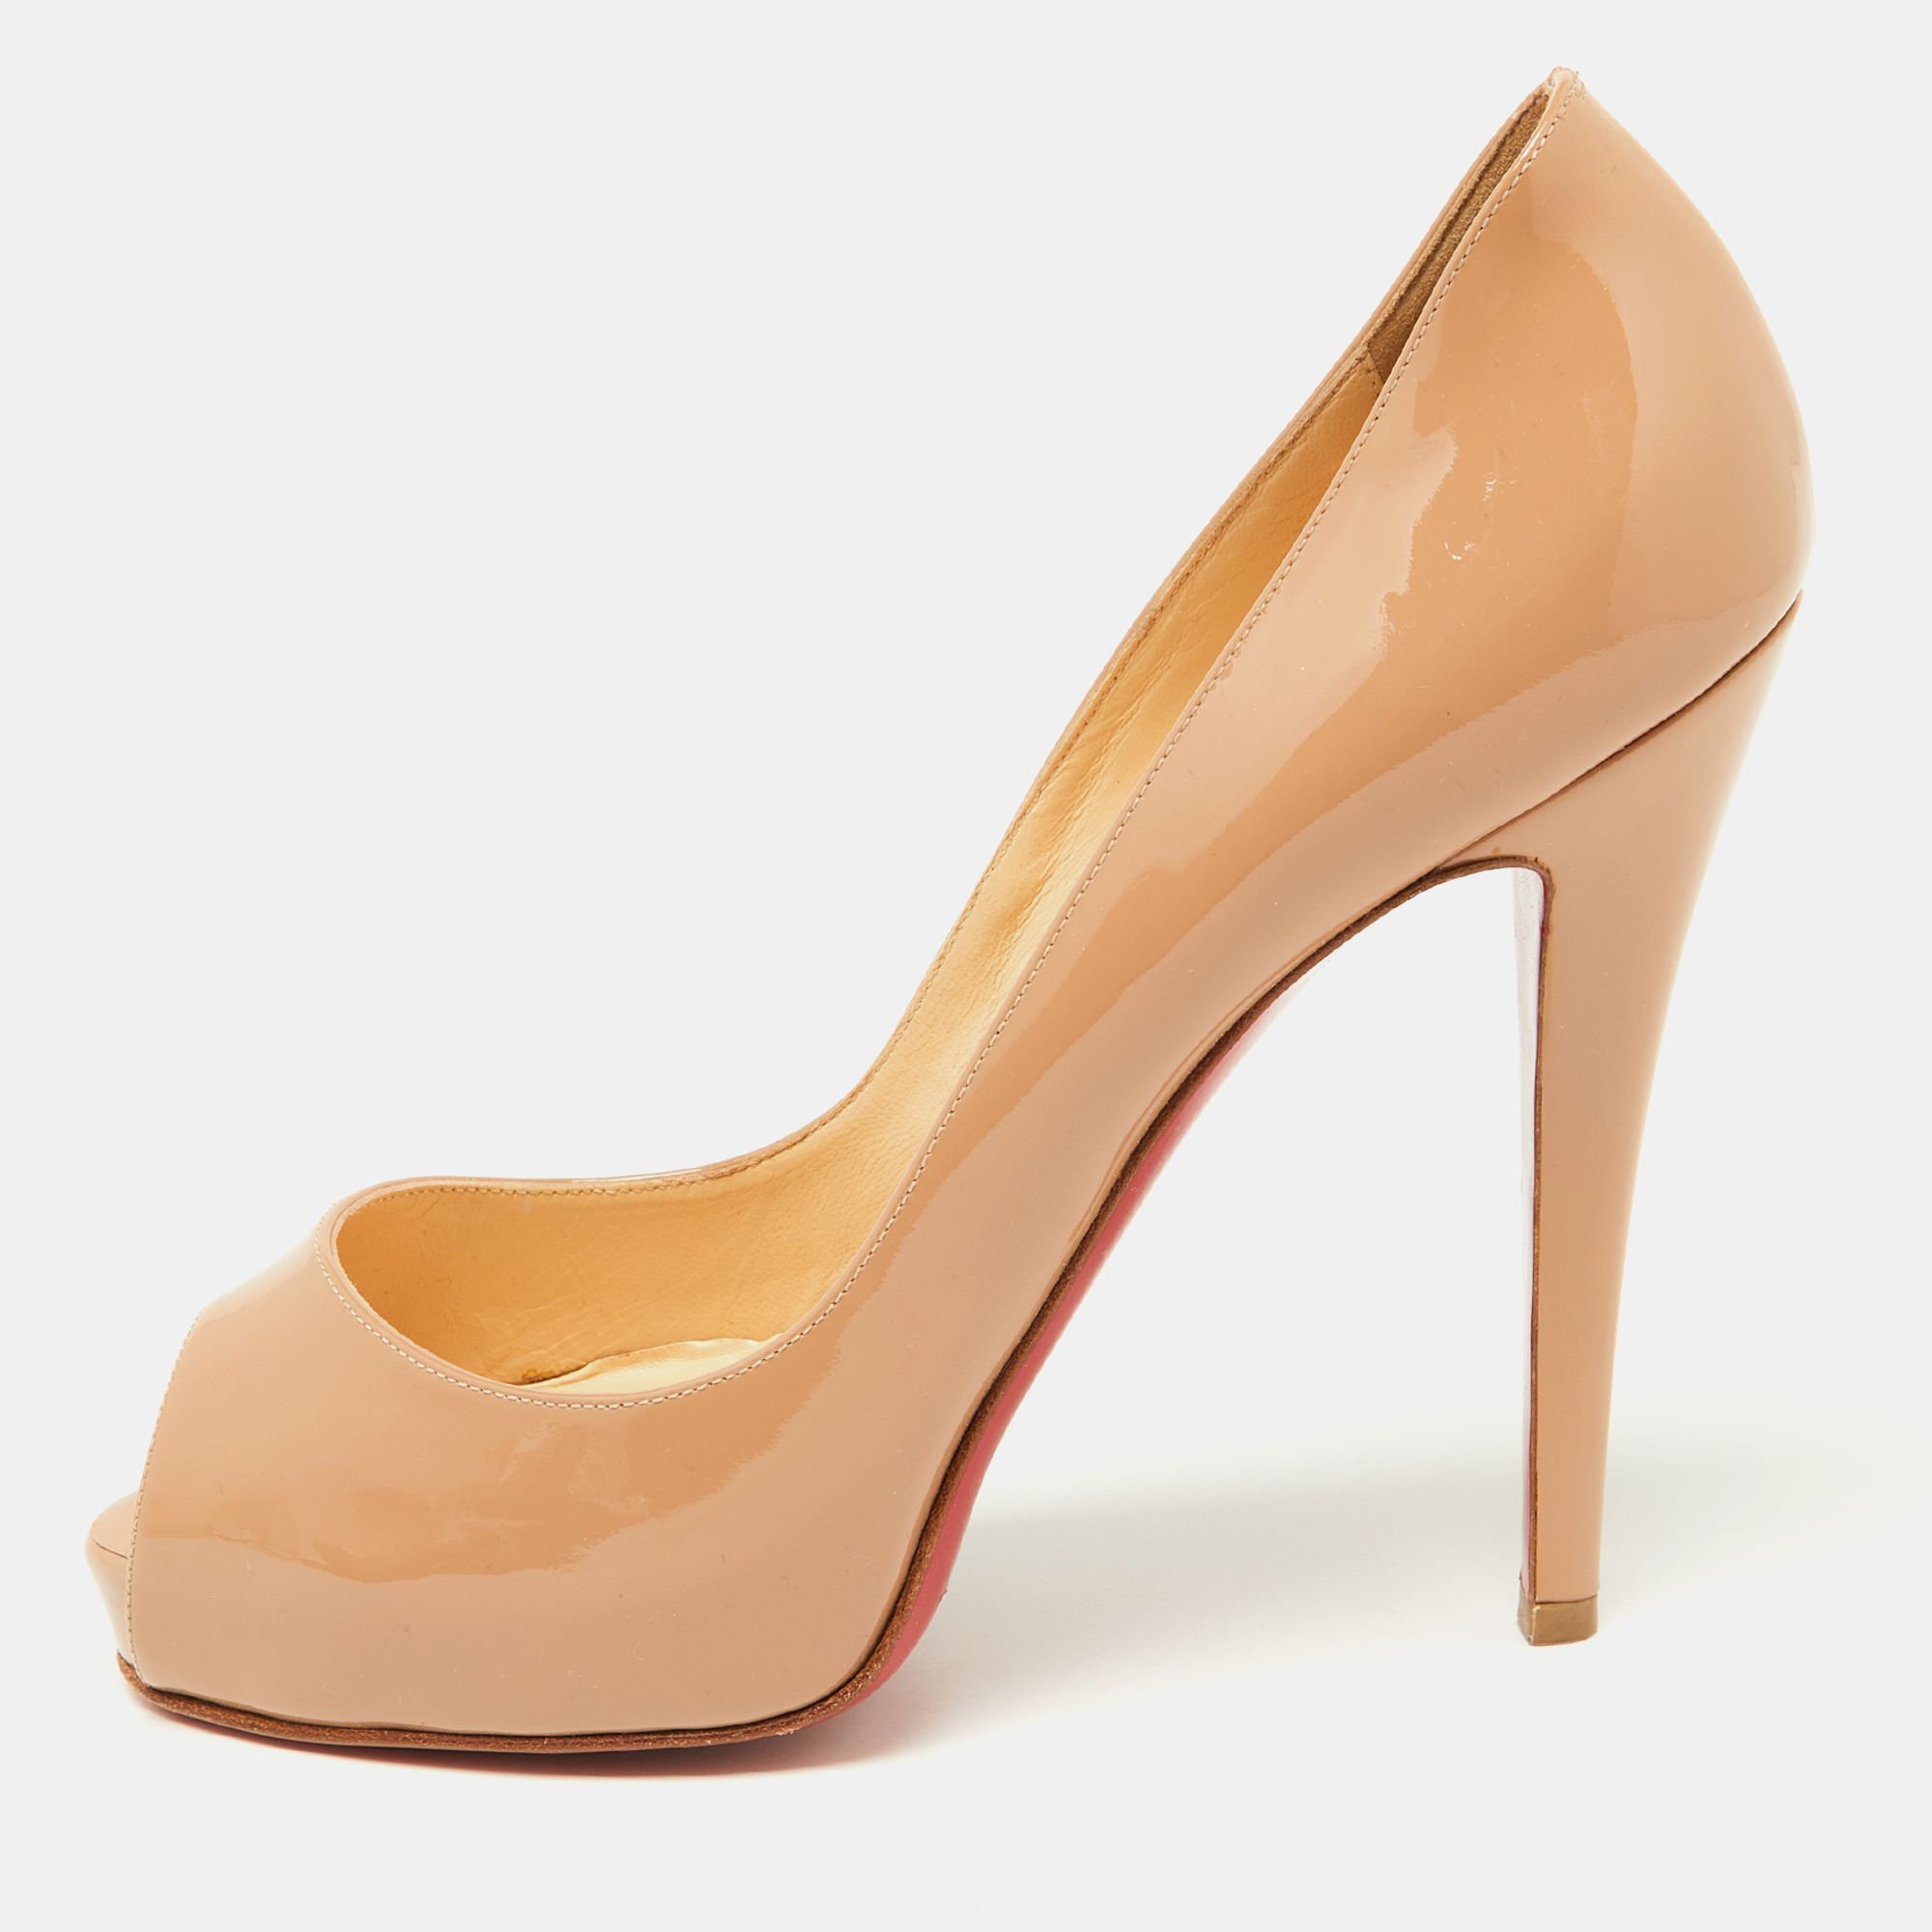 Pre-owned Christian Louboutin Beige Patent Leather Very Prive Pumps Size 38